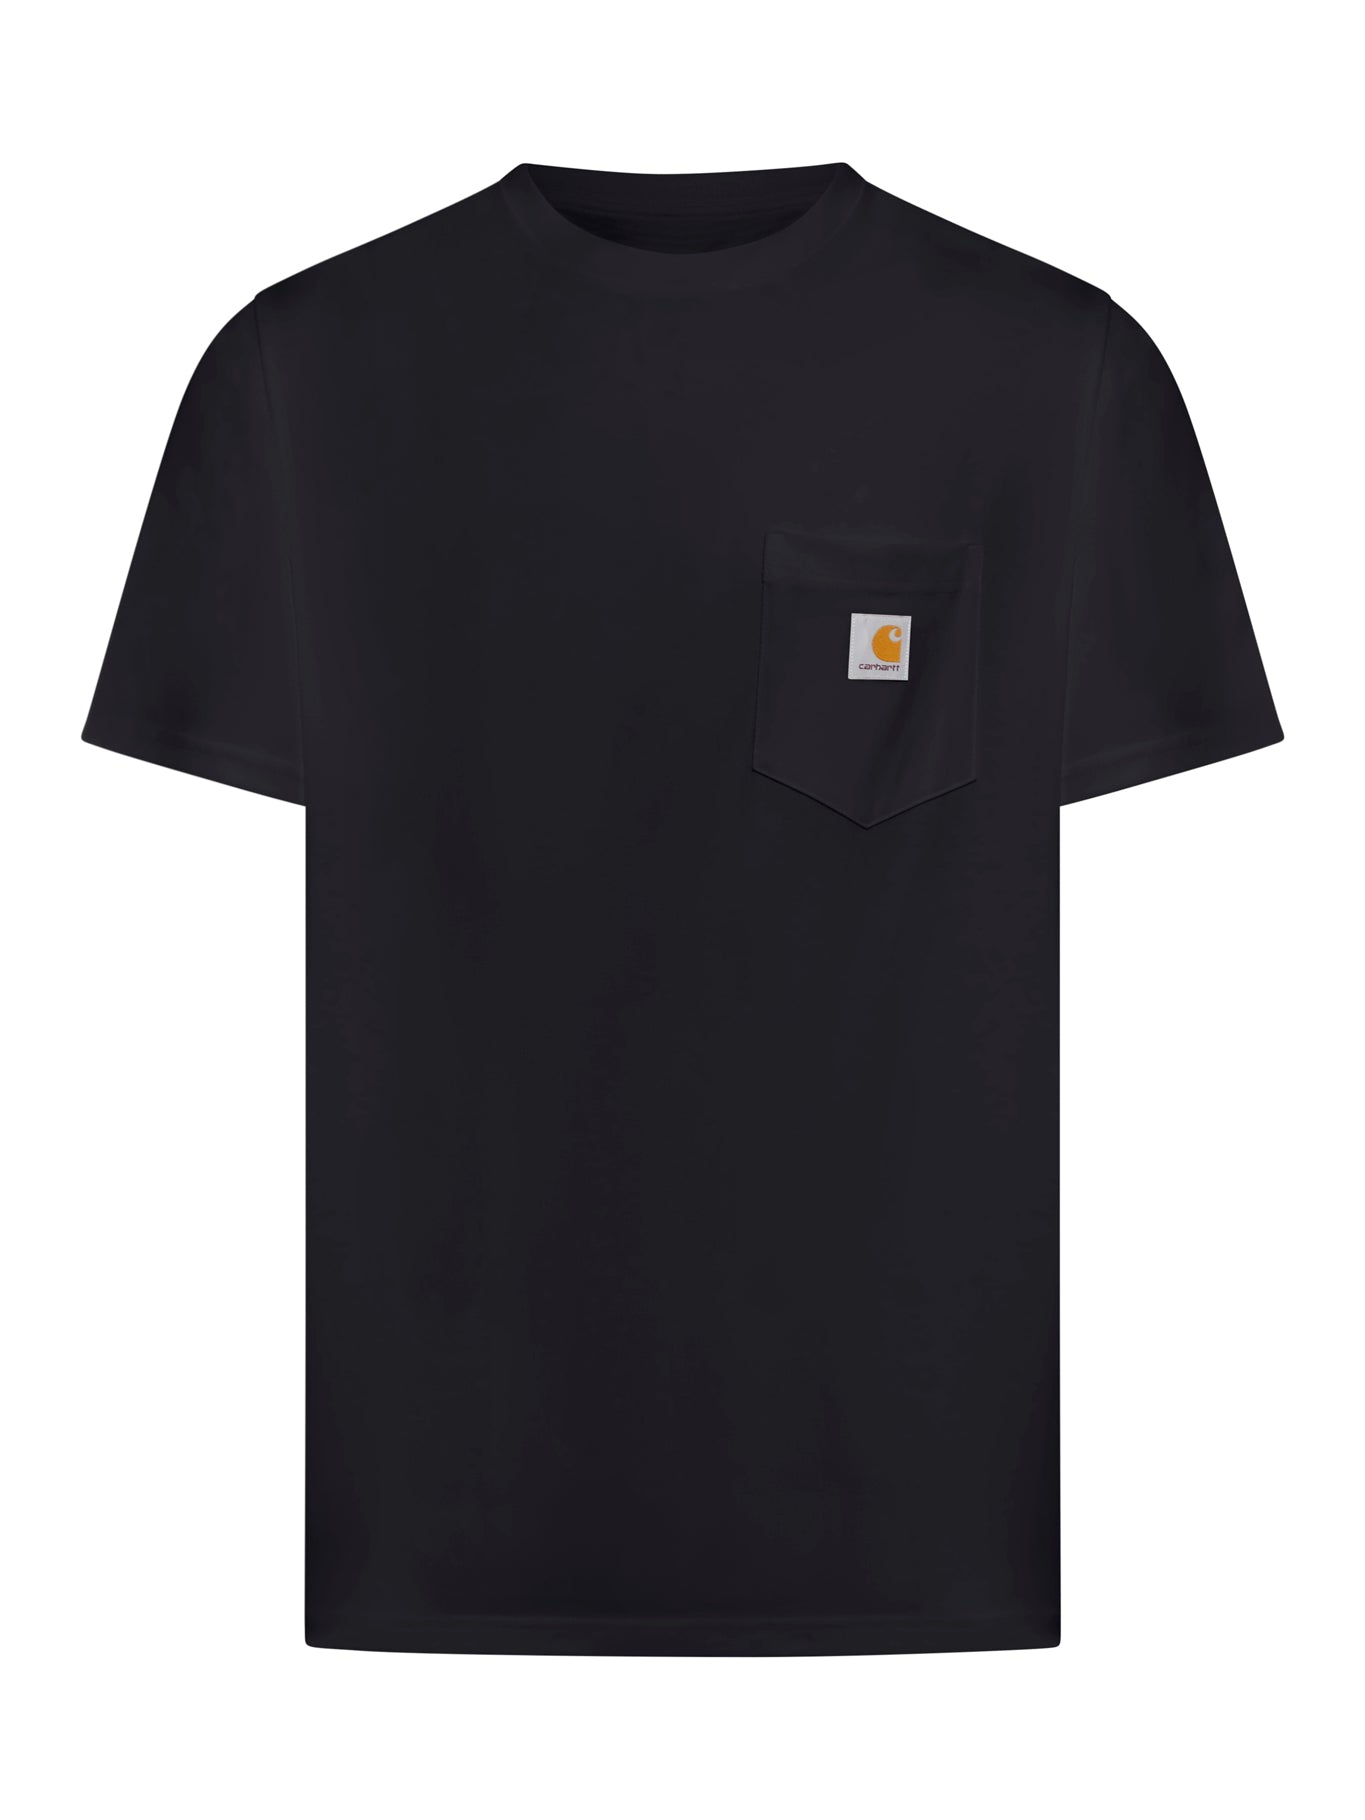 T-SHIRT CON PATCH LOGO IN NERO